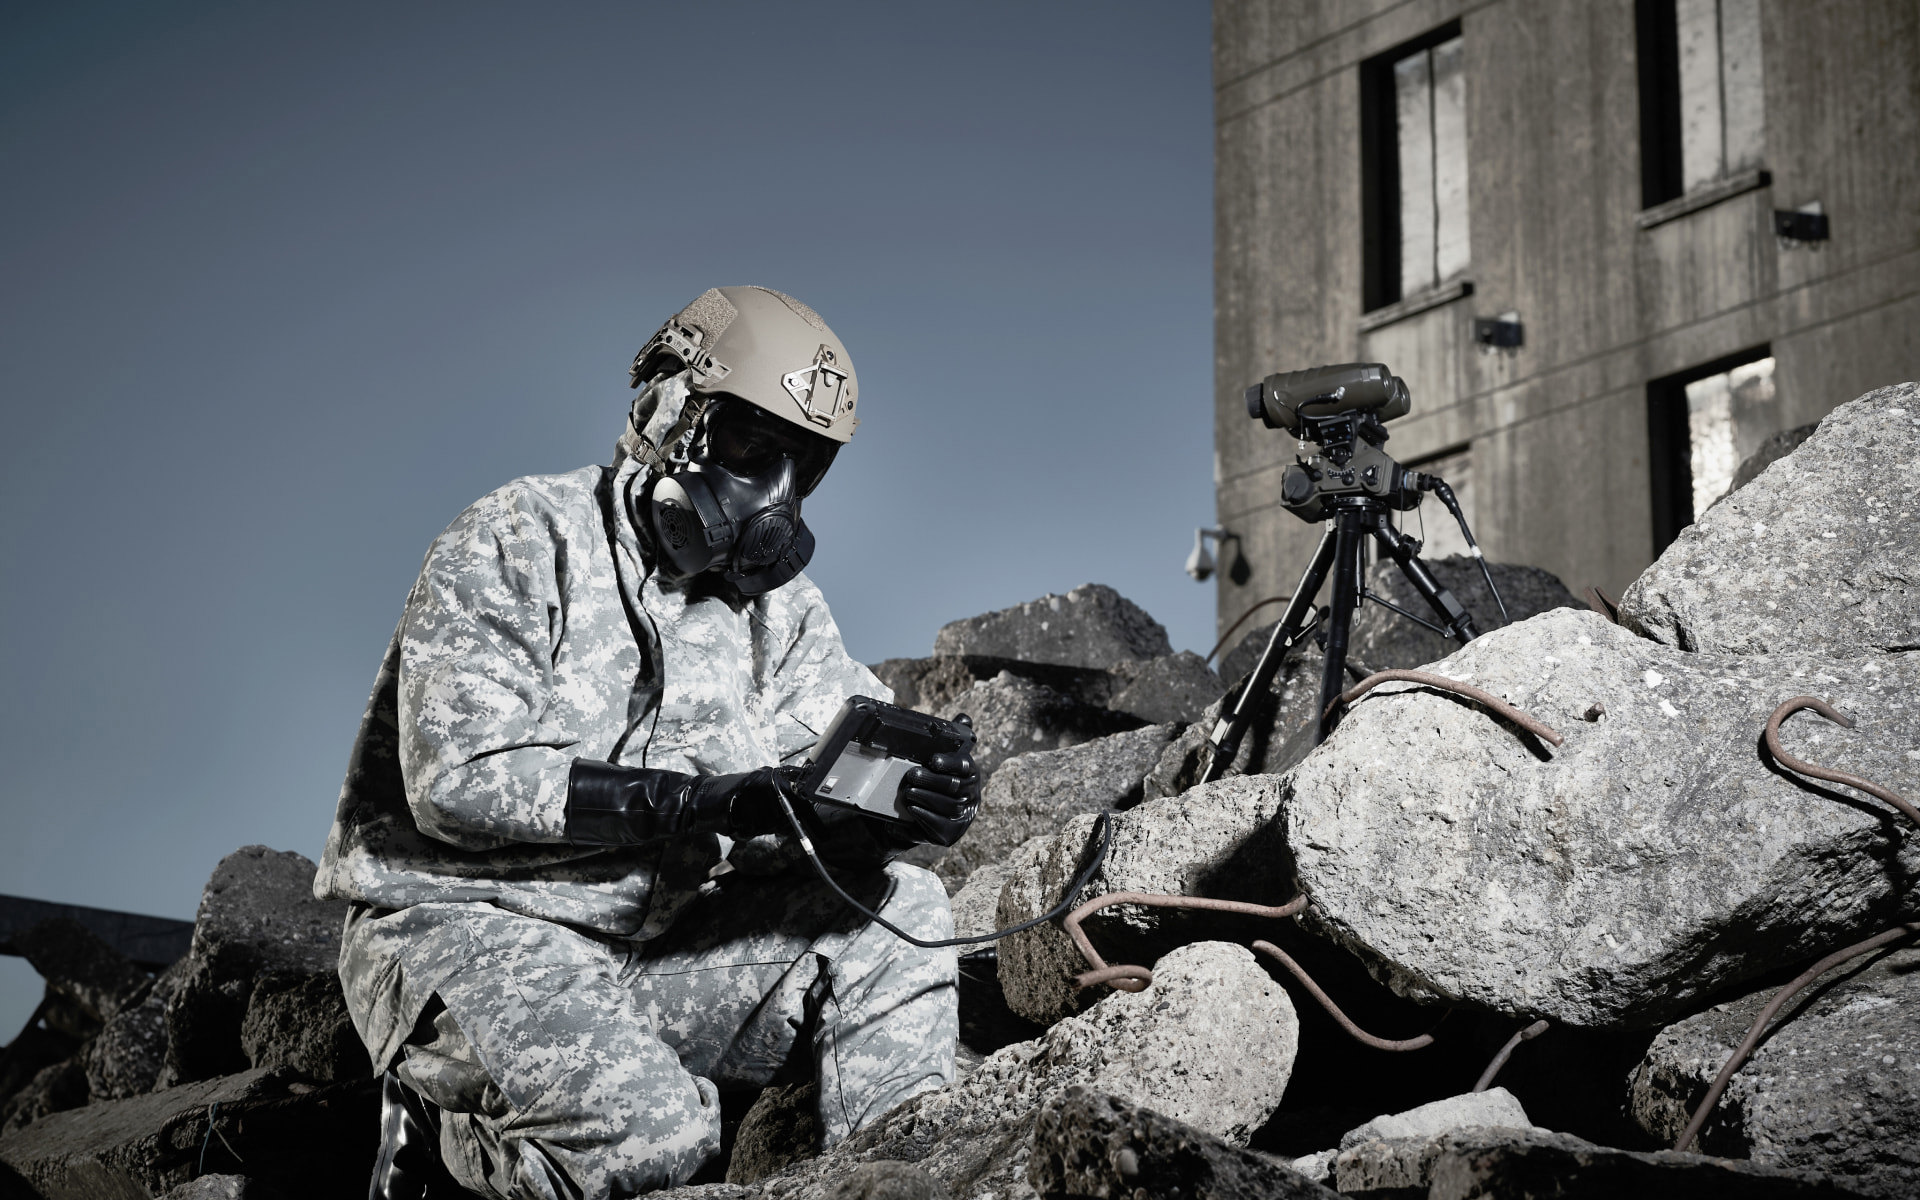 A soldier kneeing on rubble wearing a helmet and respirator